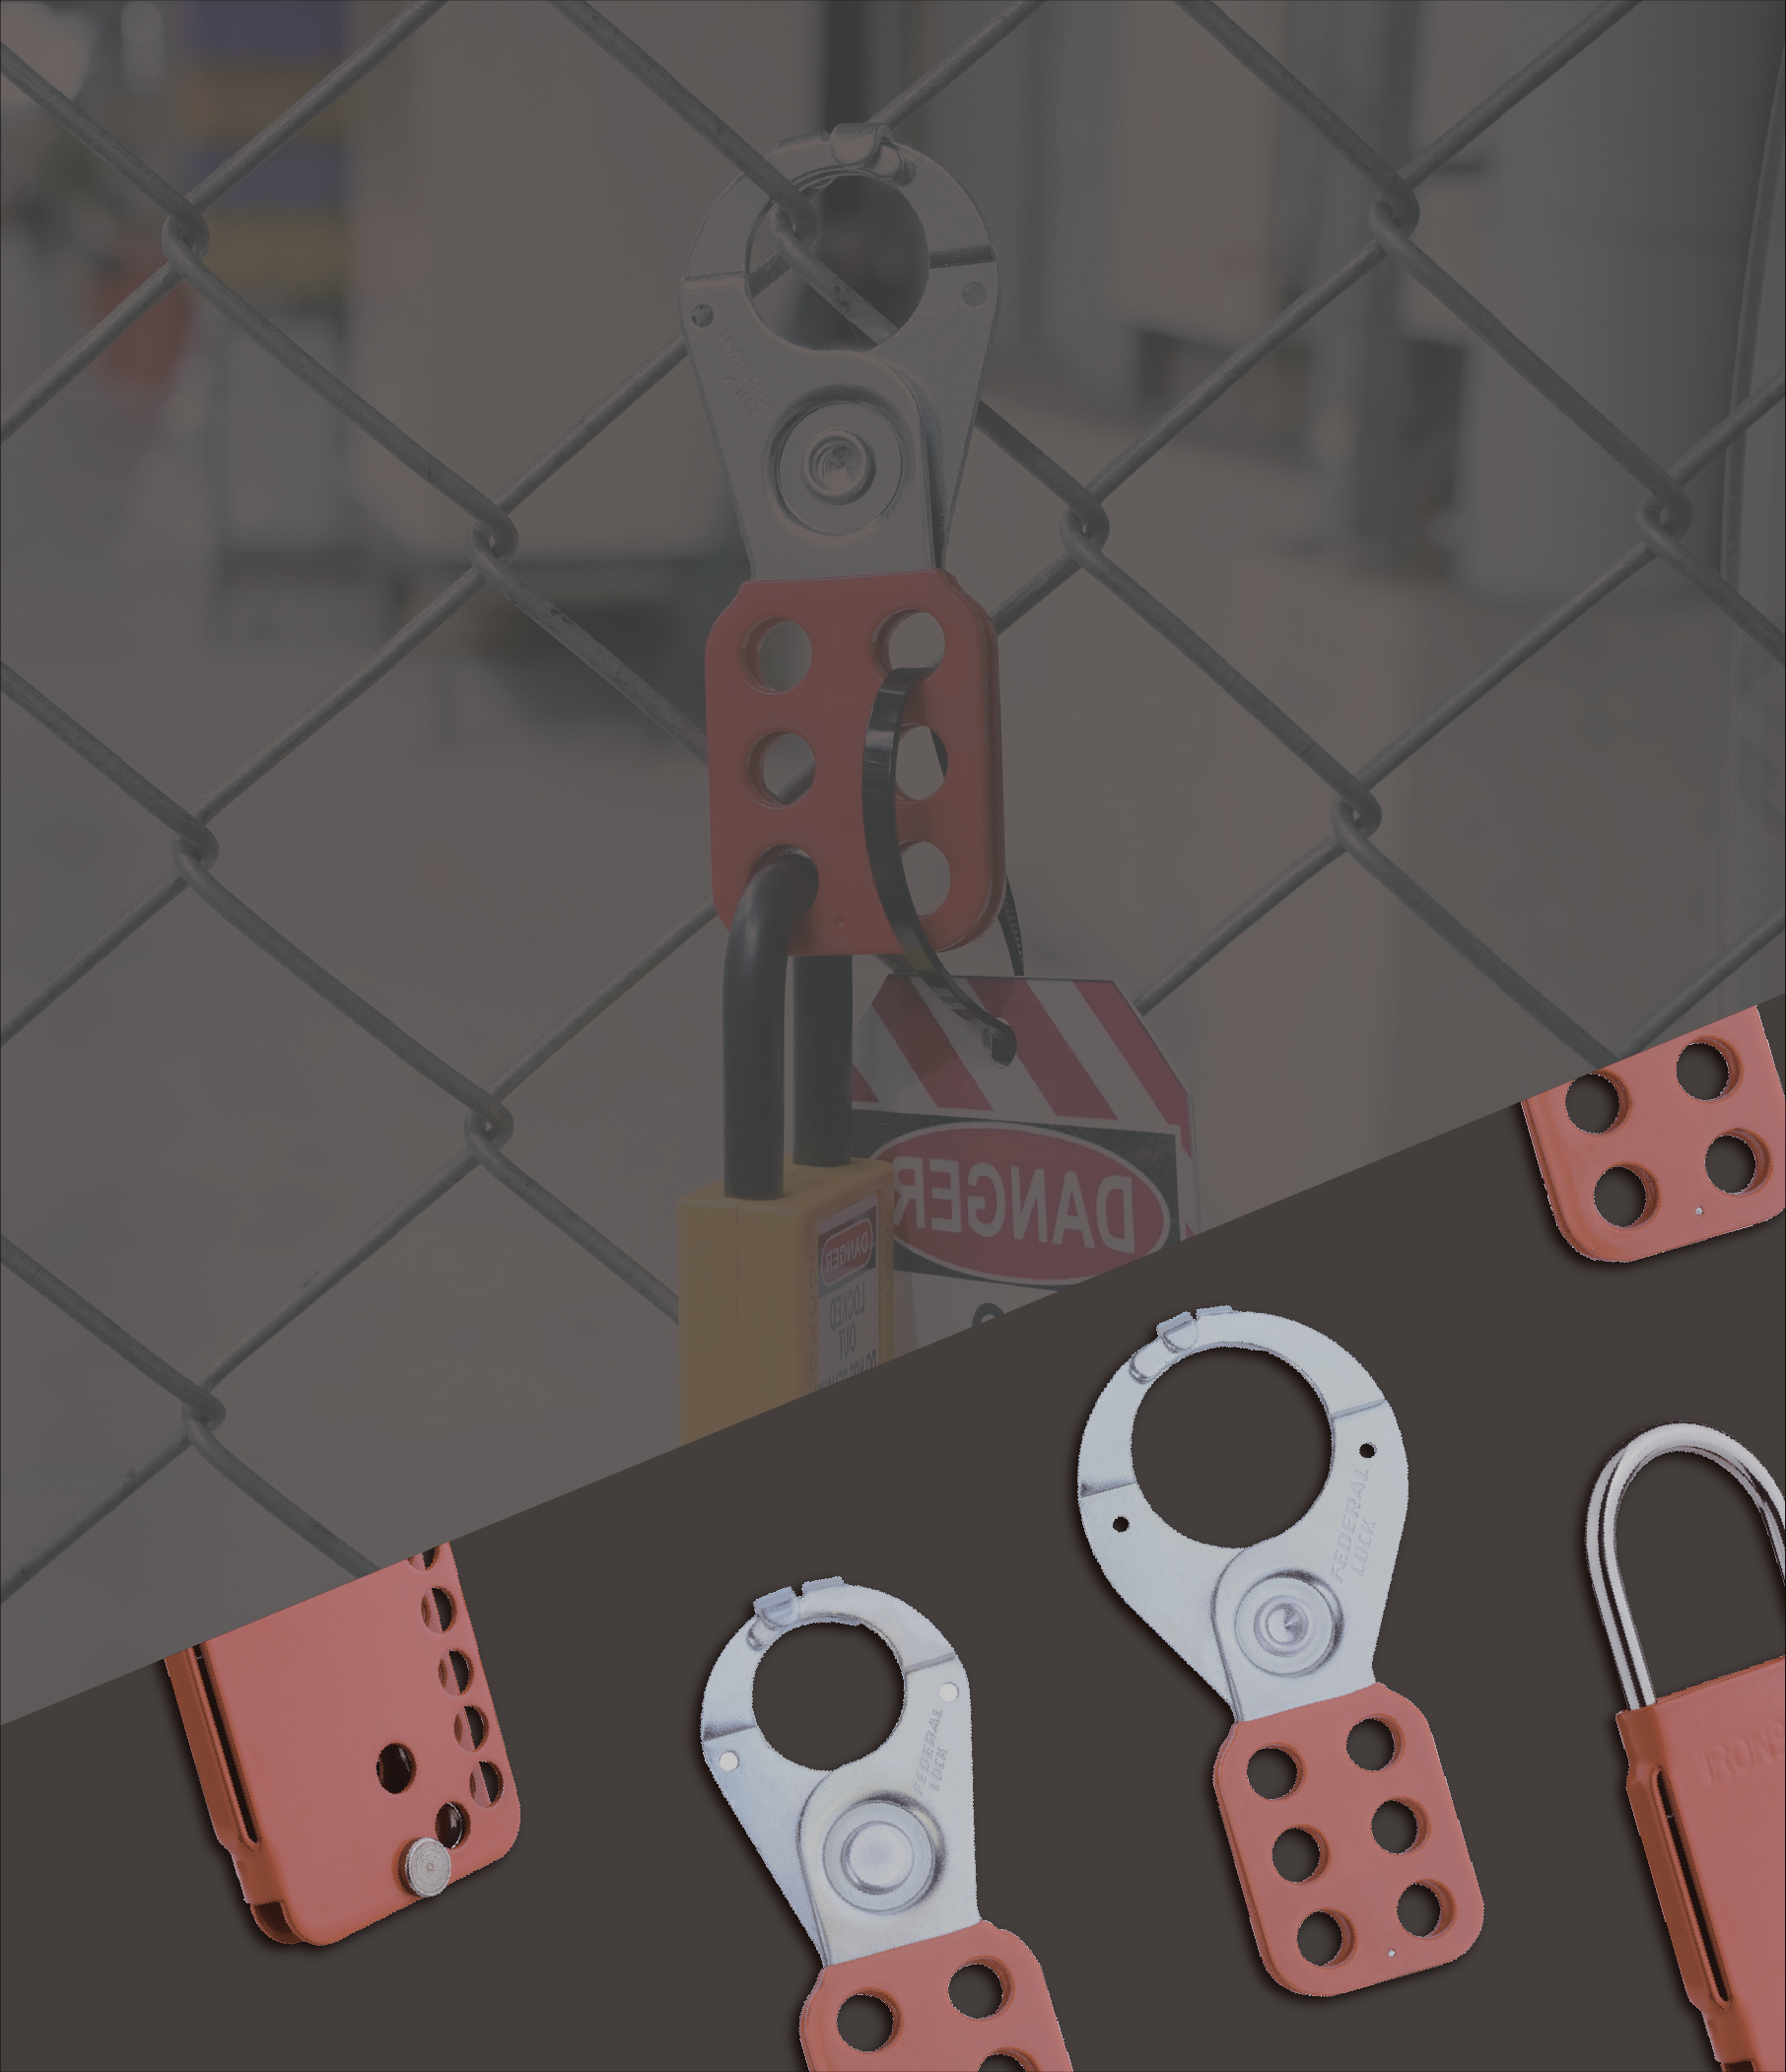 Safety Lockout Hasp